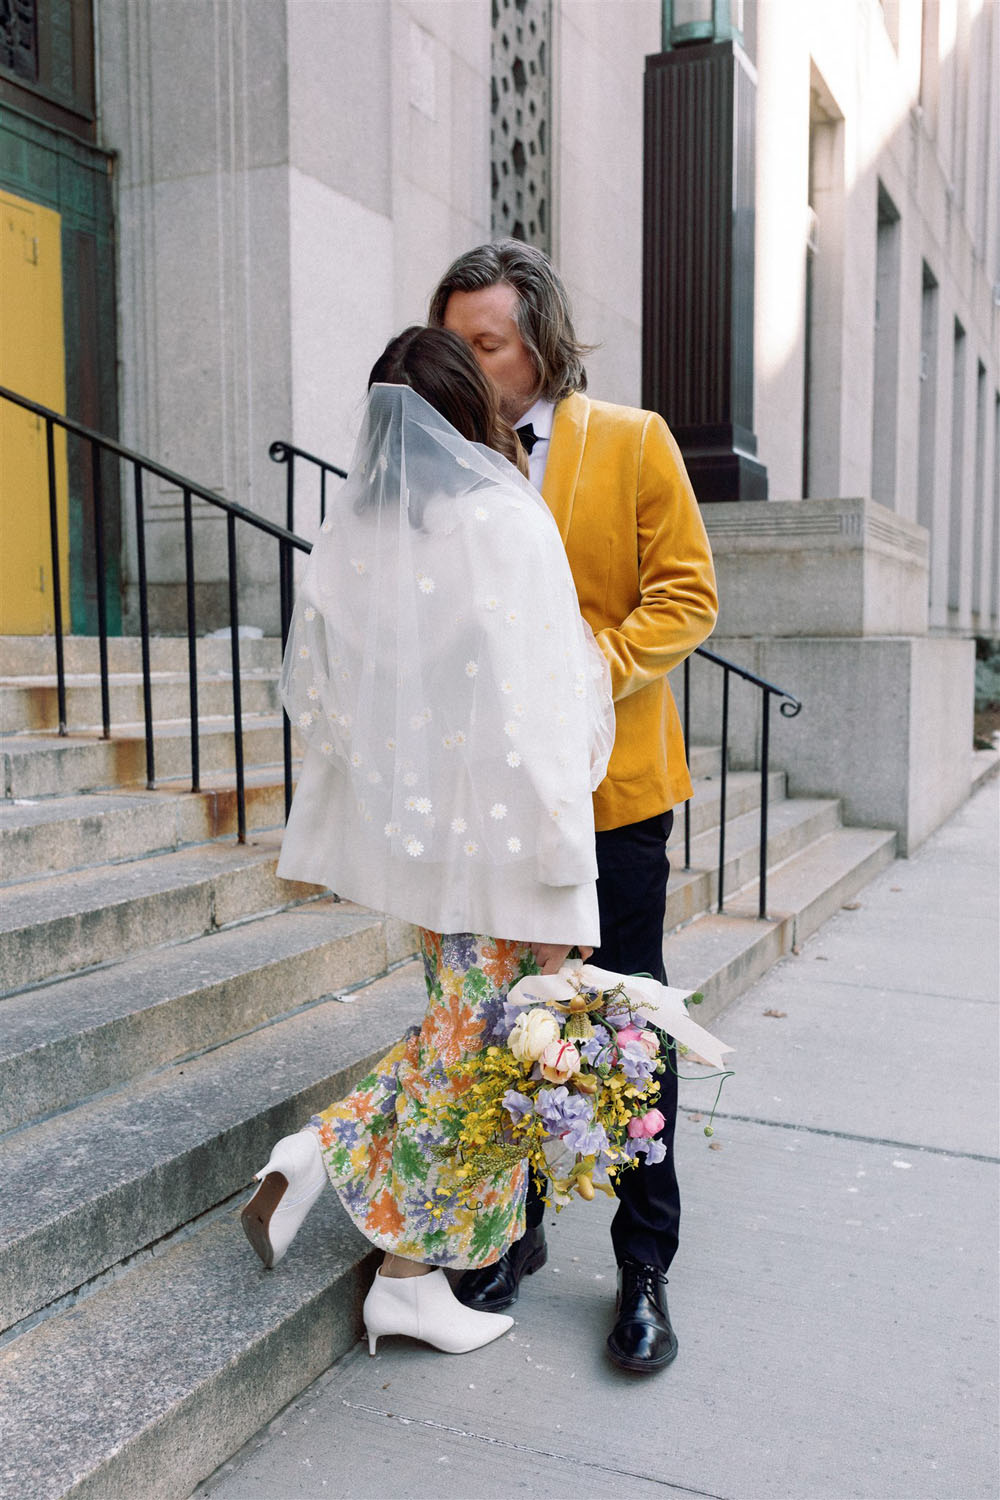 Tips for stylish, creative elopement photos